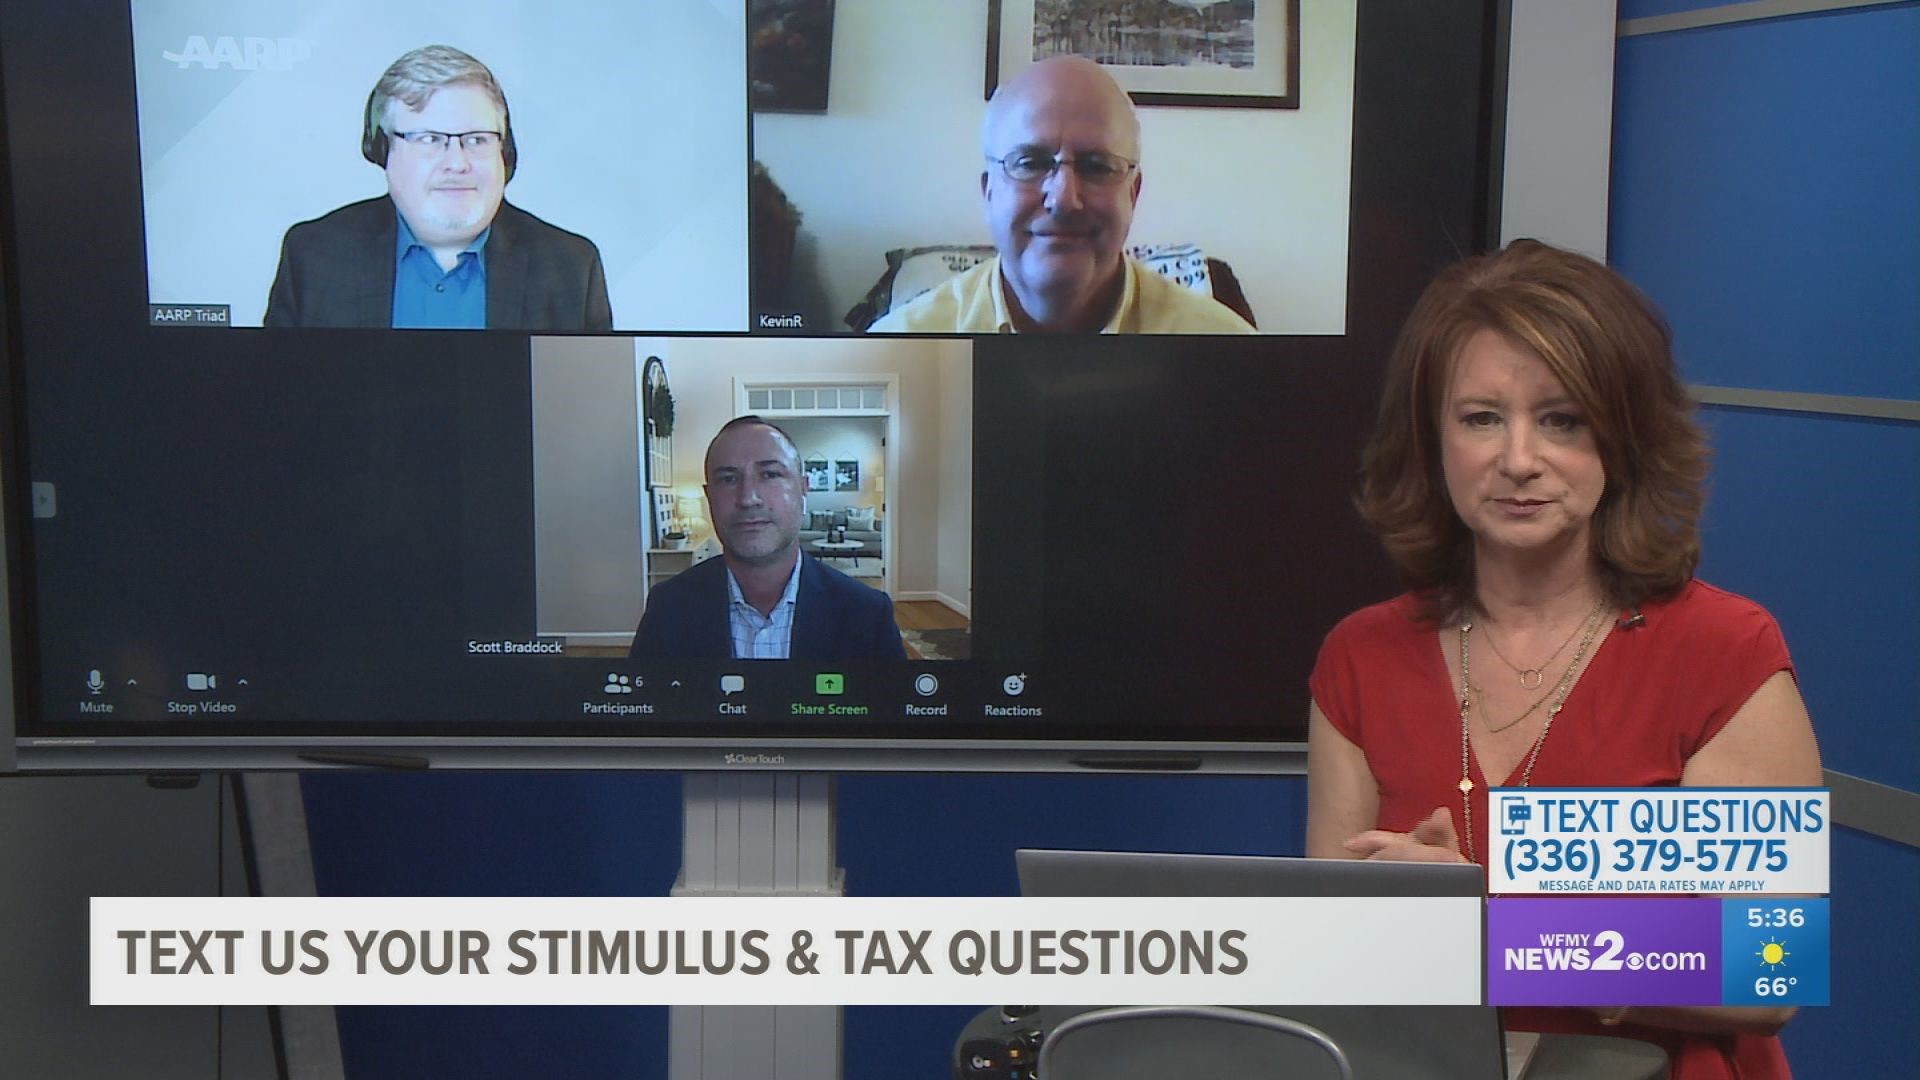 Americans could receive a third stimulus as early as mid-to-late March. WFMY News 2’s experts answer your stimulus questions.